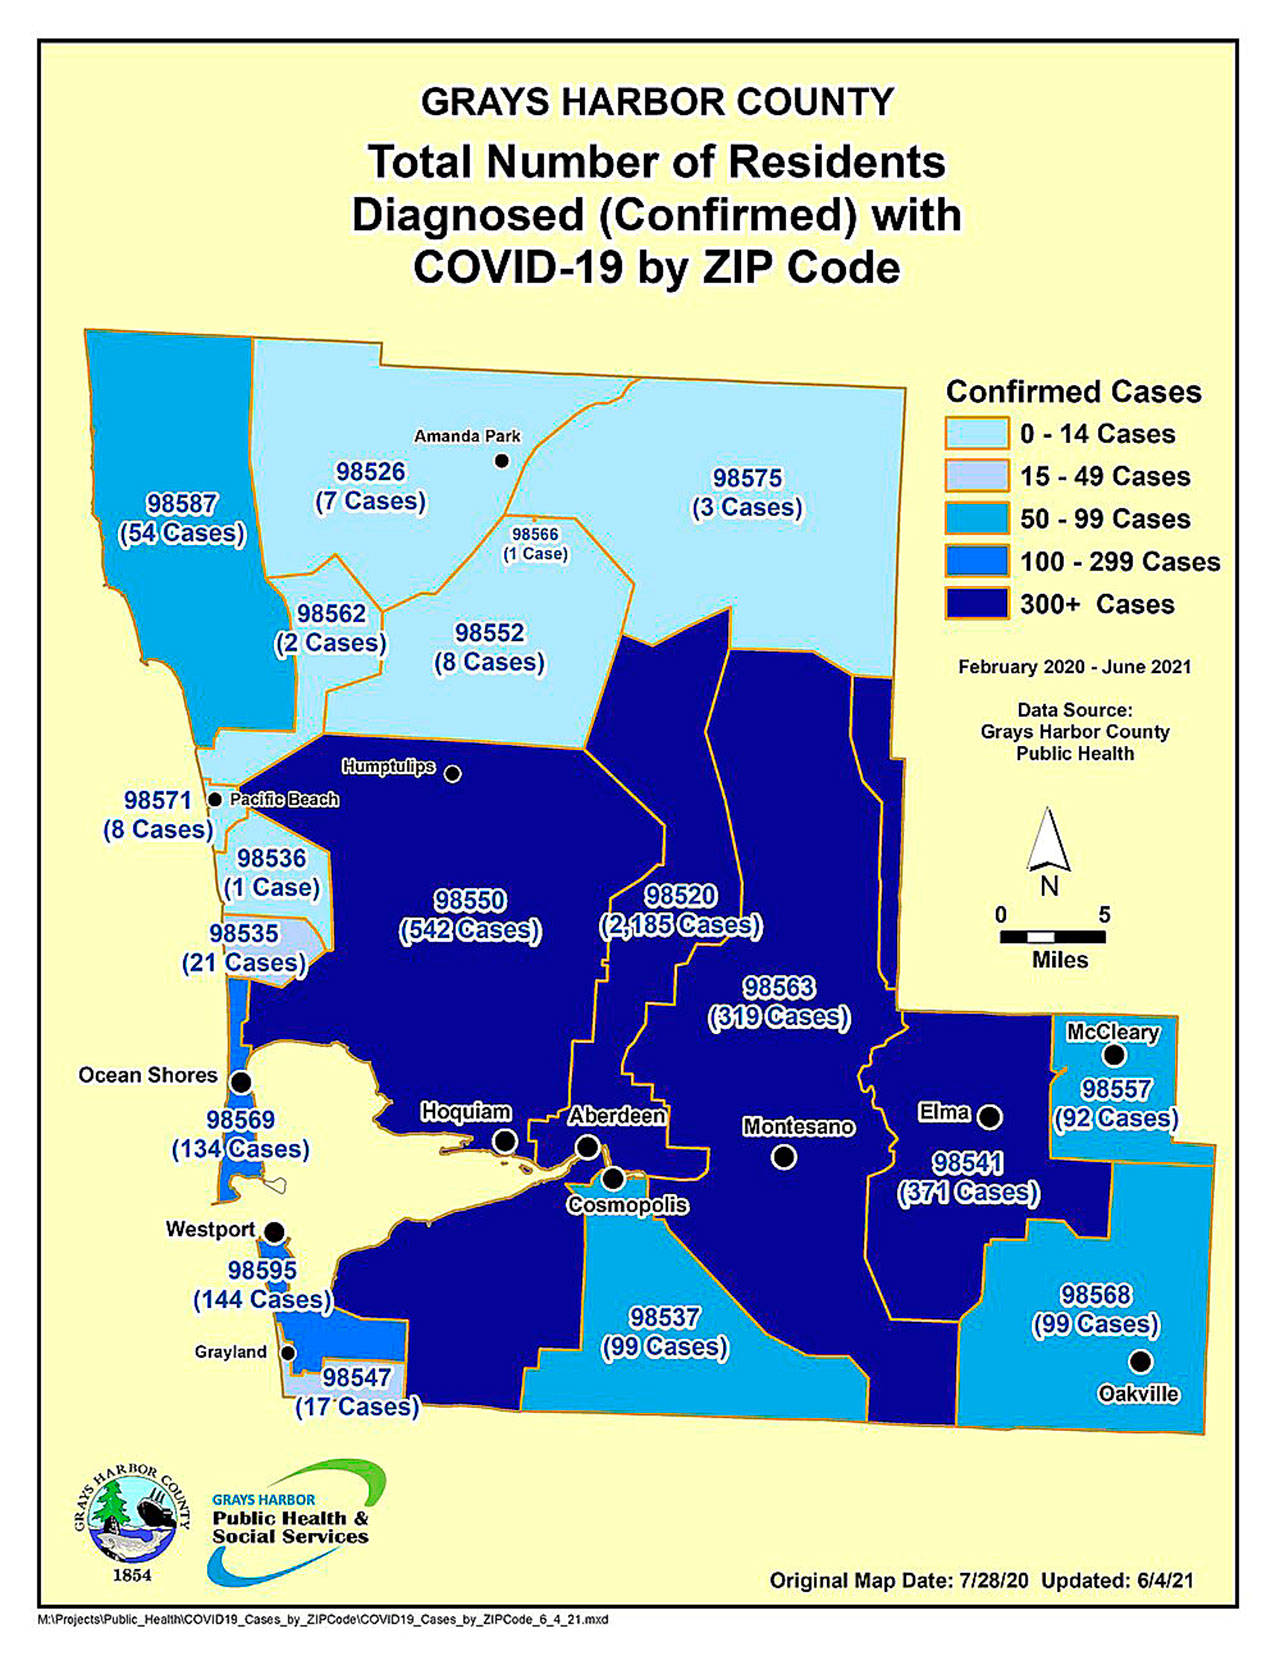 (Courtesy Grays Harbor County Public Health)
COVID-19 case pandemic totals in Grays Harbor County by ZIP code, updated Friday.